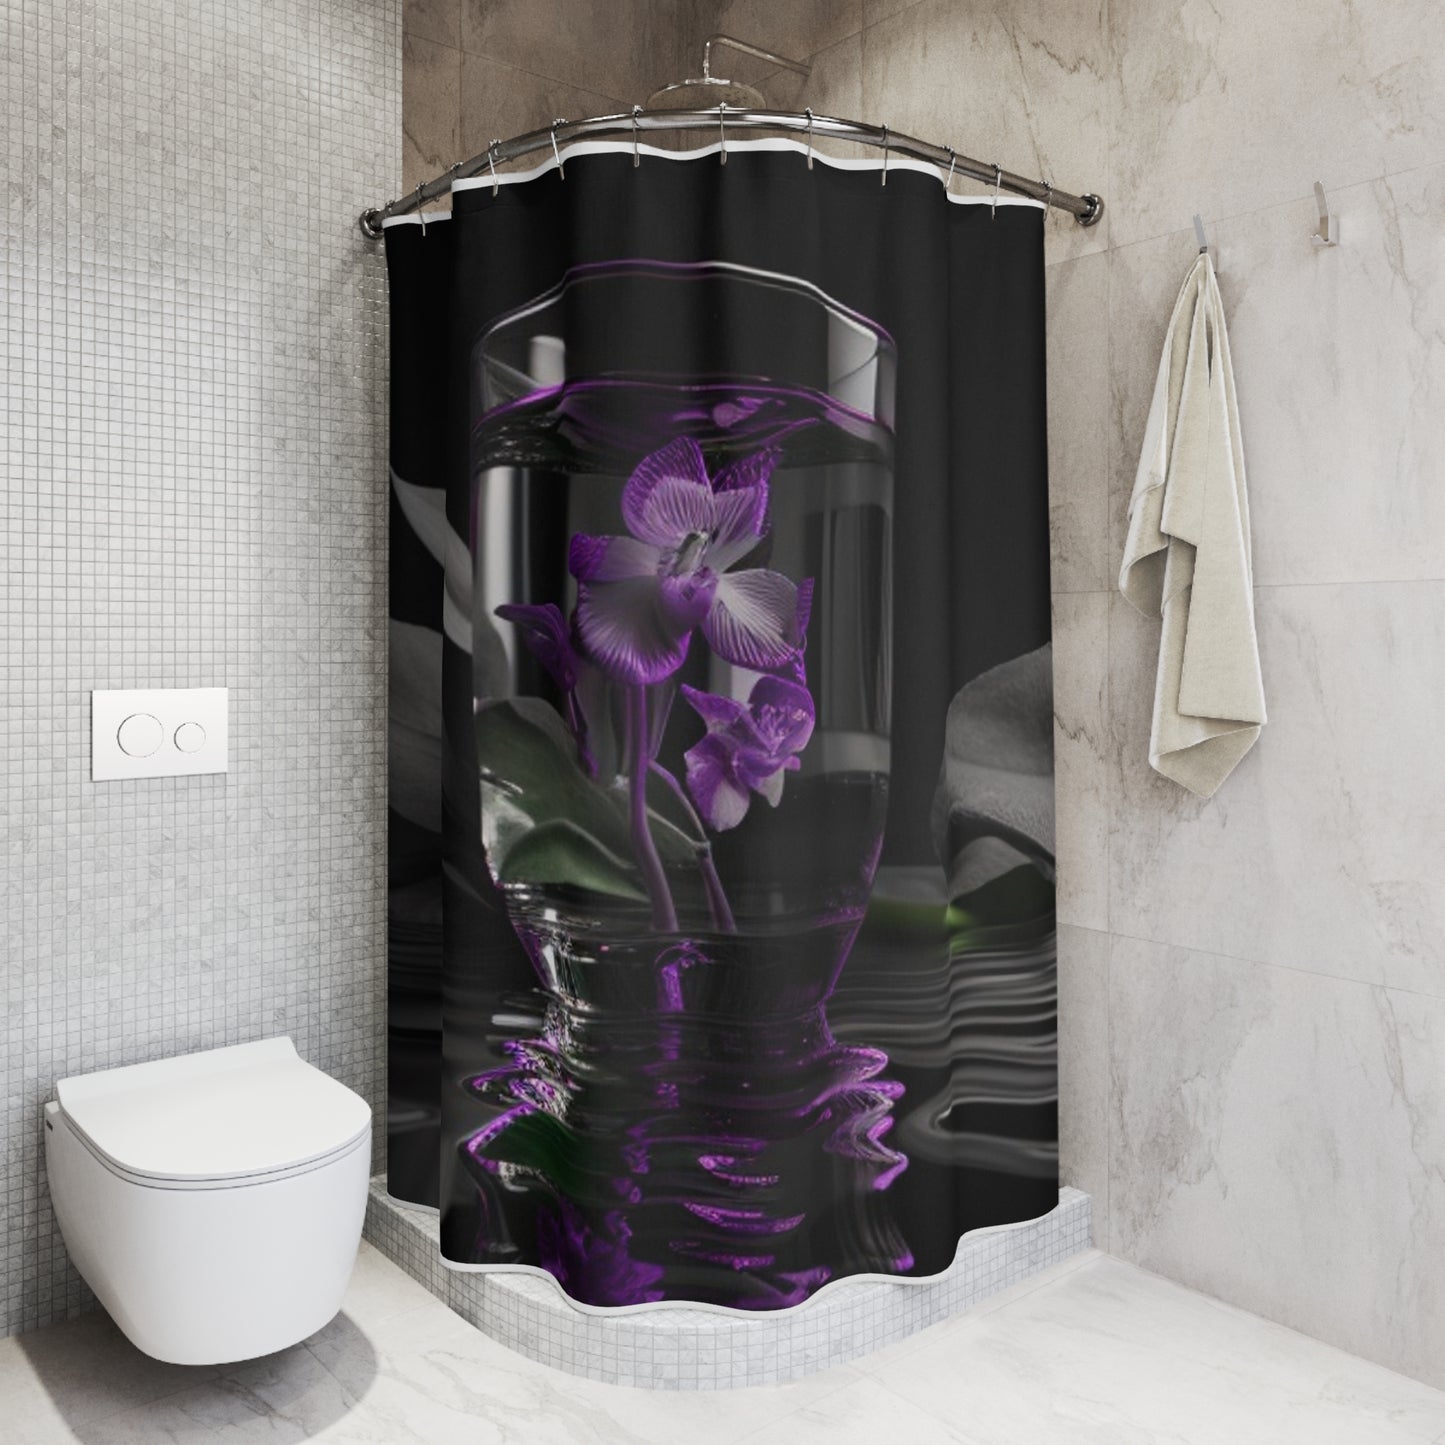 Polyester Shower Curtain Purple Orchid Glass vase 1